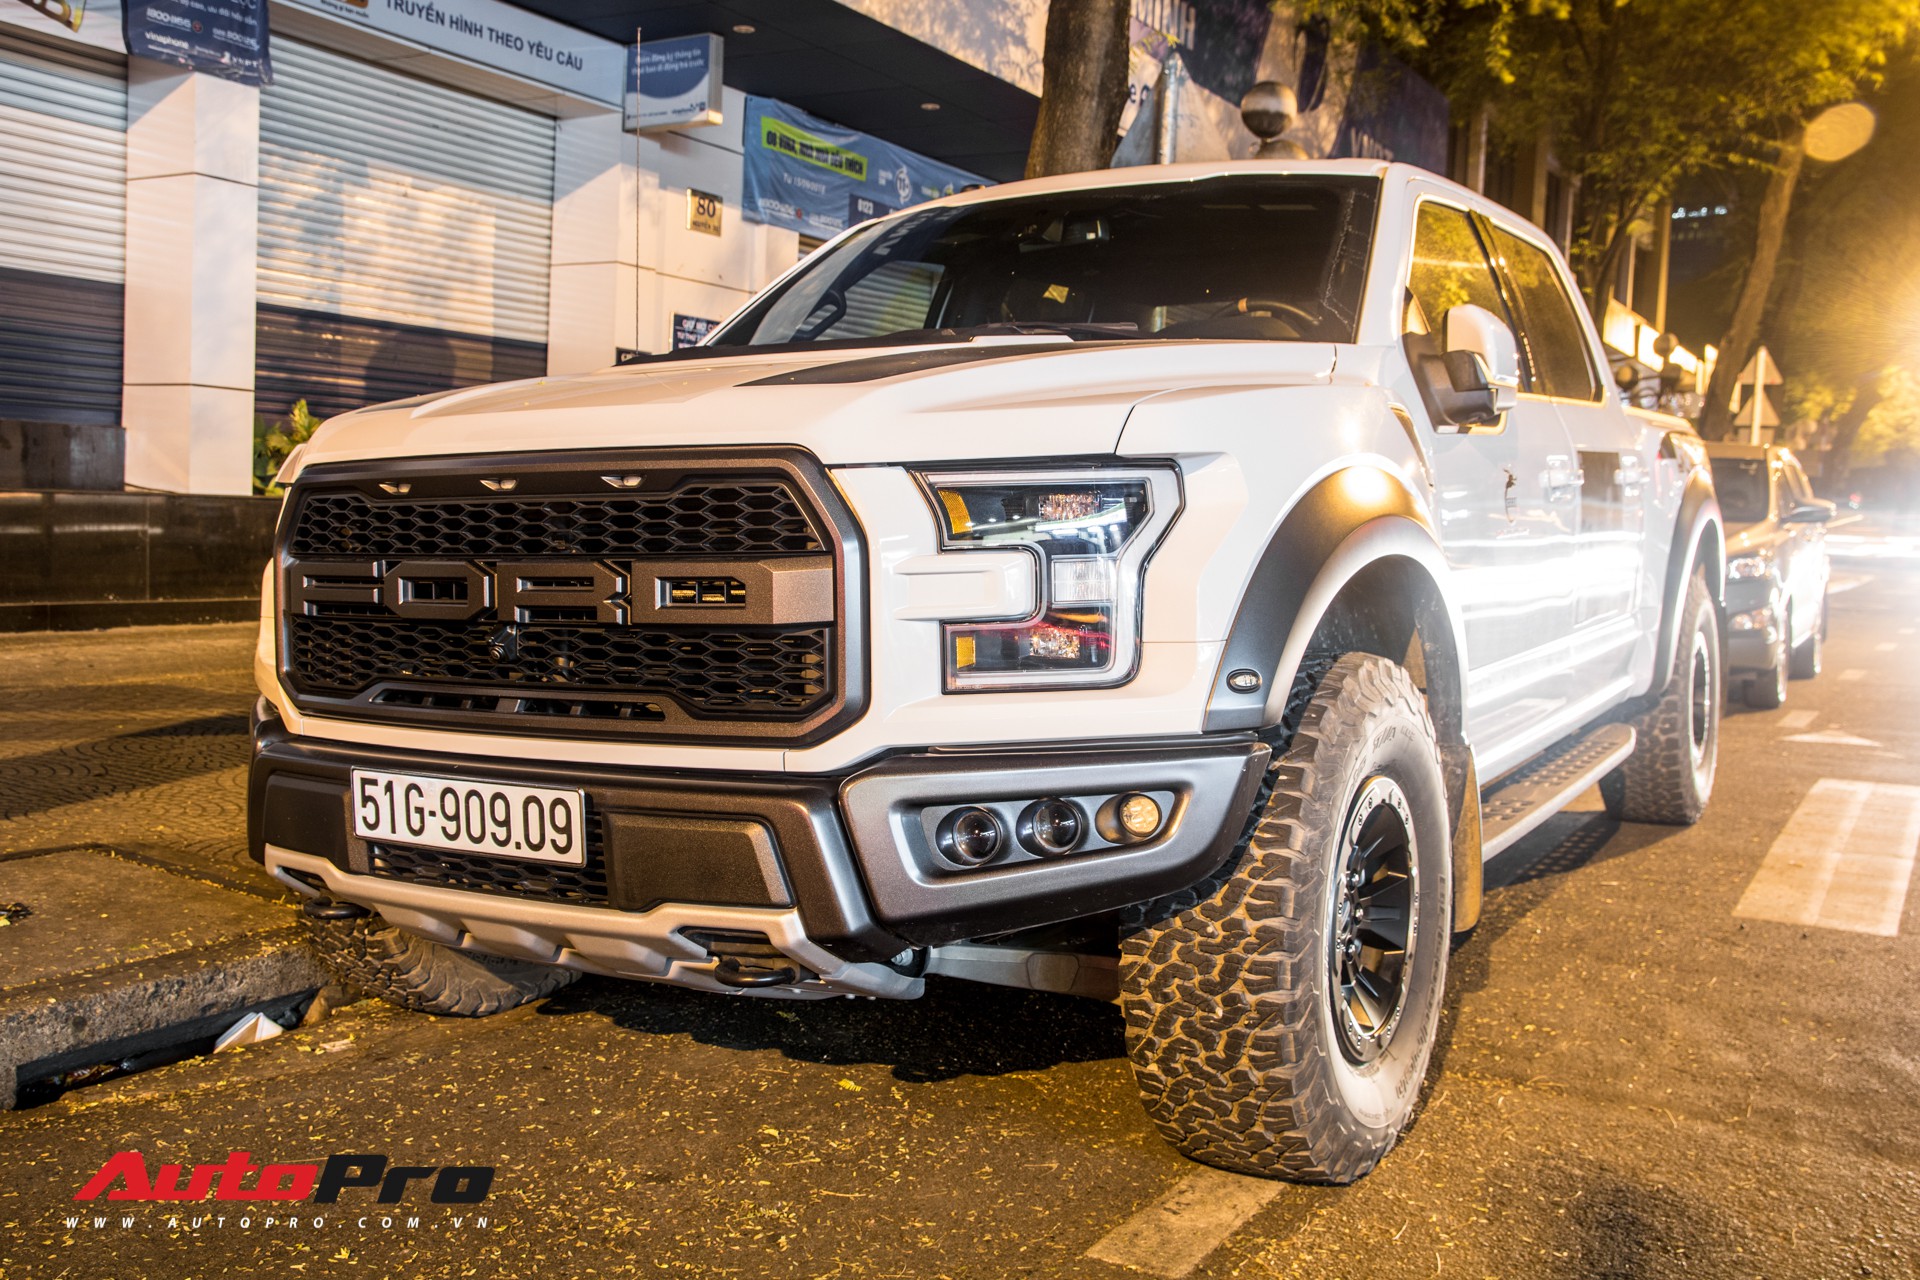 The brilliant trailering tech in the 2019 Ford Raptor tested by a newbie   TechRadar